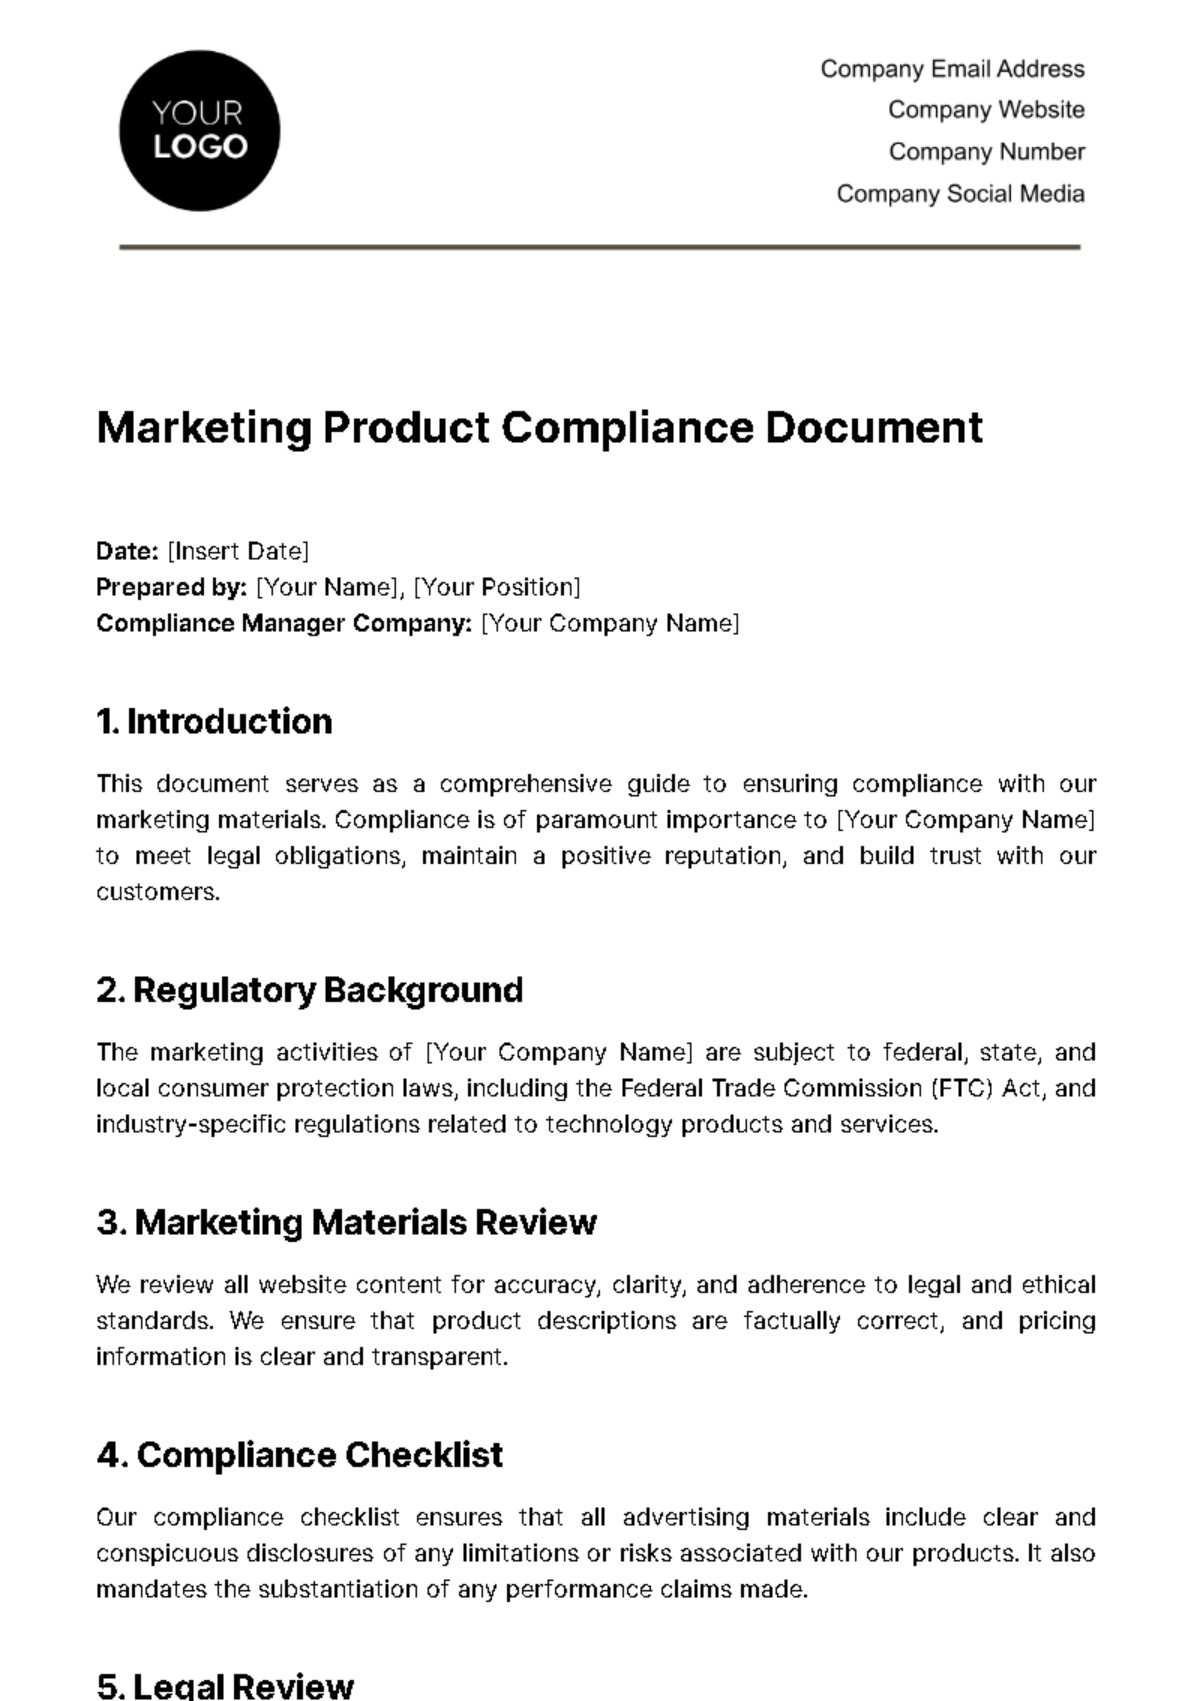 Marketing Product Compliance Document Template